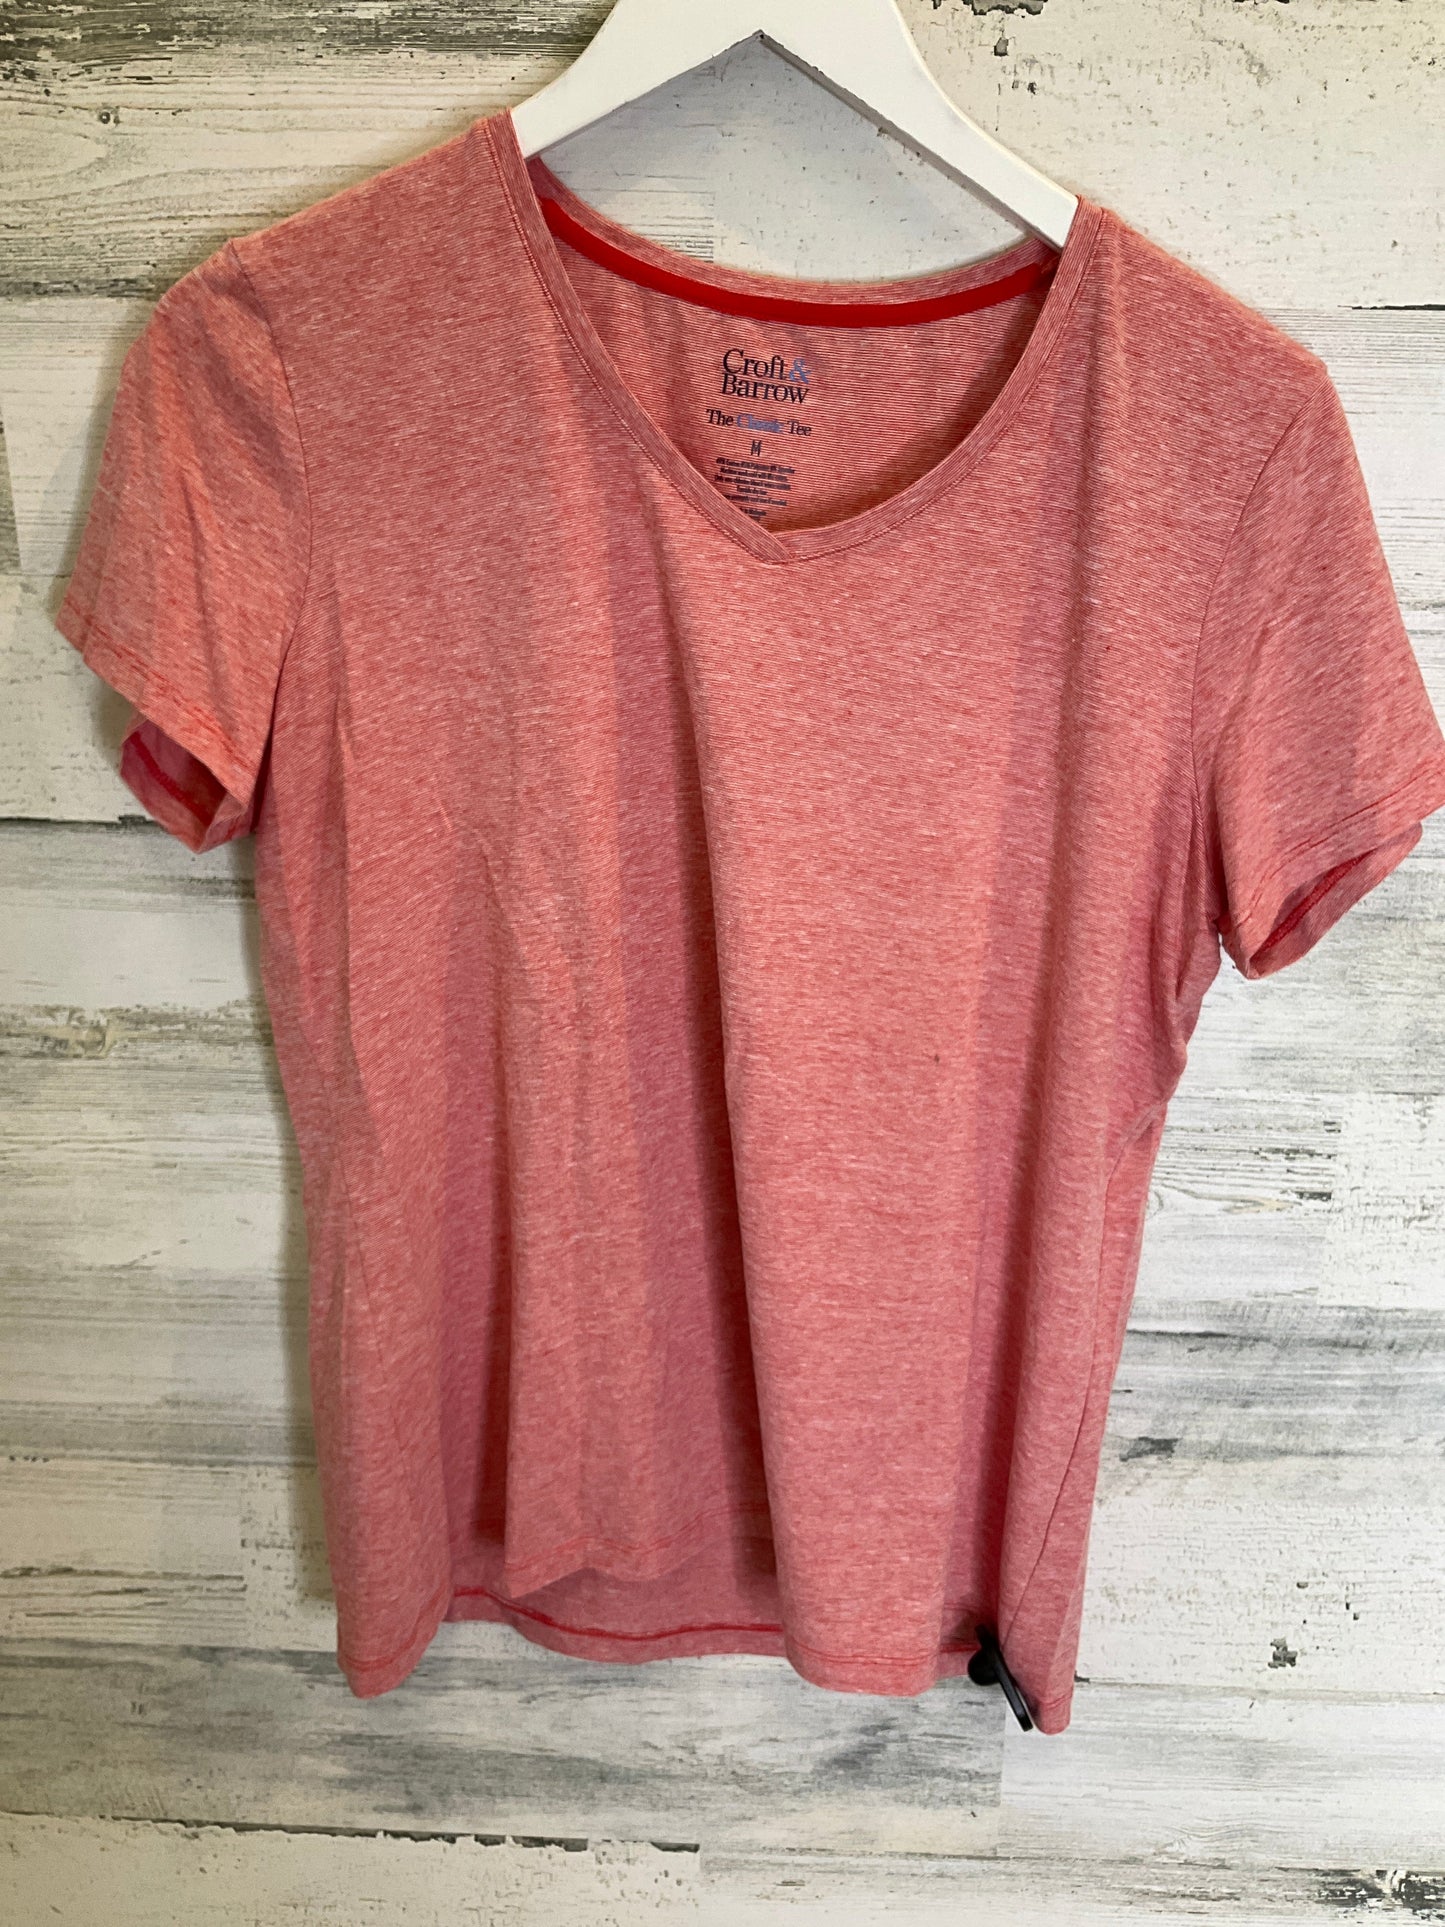 Red Top Short Sleeve Croft And Barrow, Size M